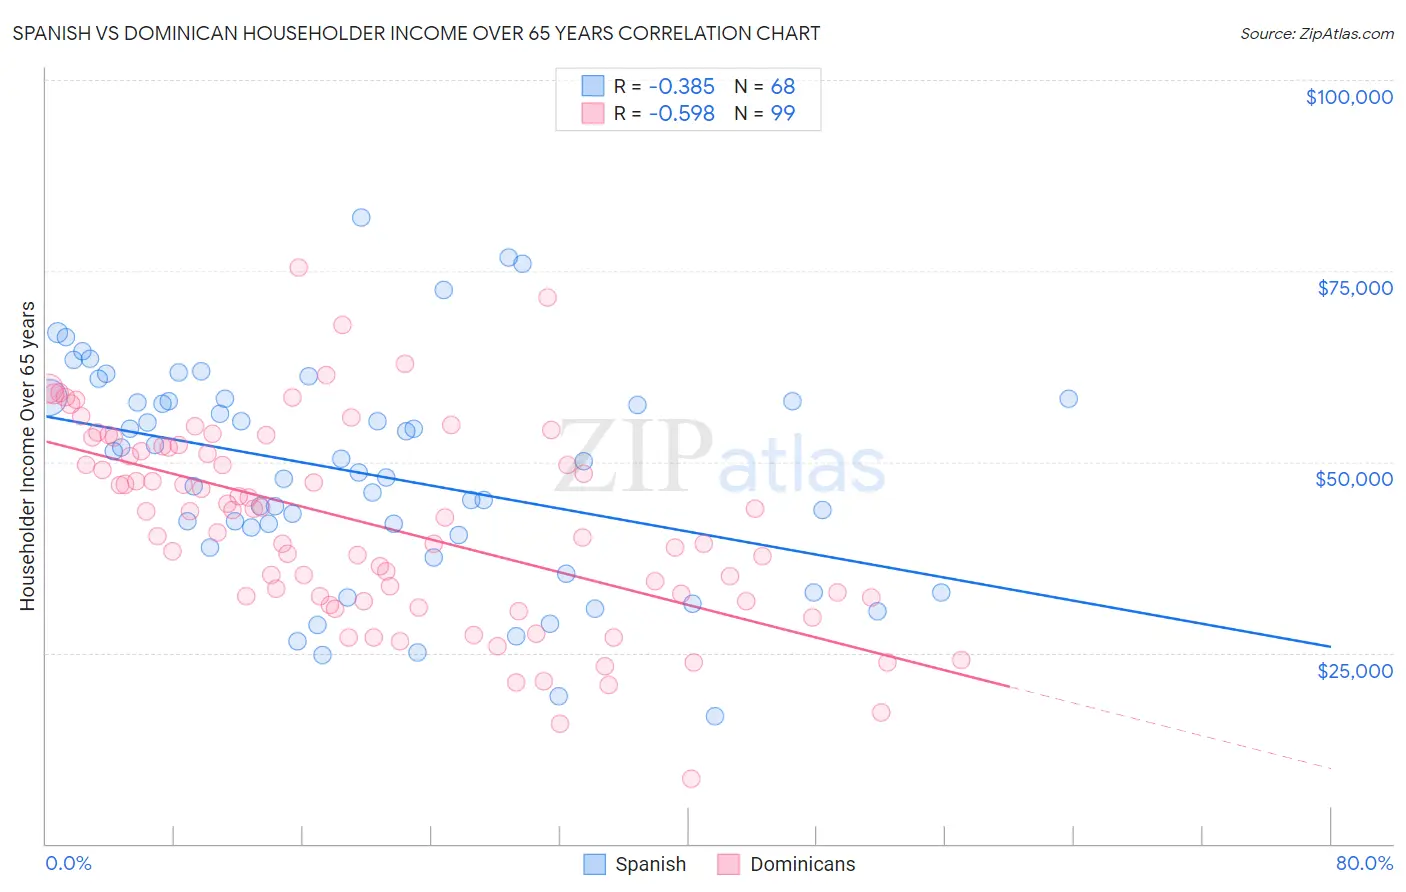 Spanish vs Dominican Householder Income Over 65 years